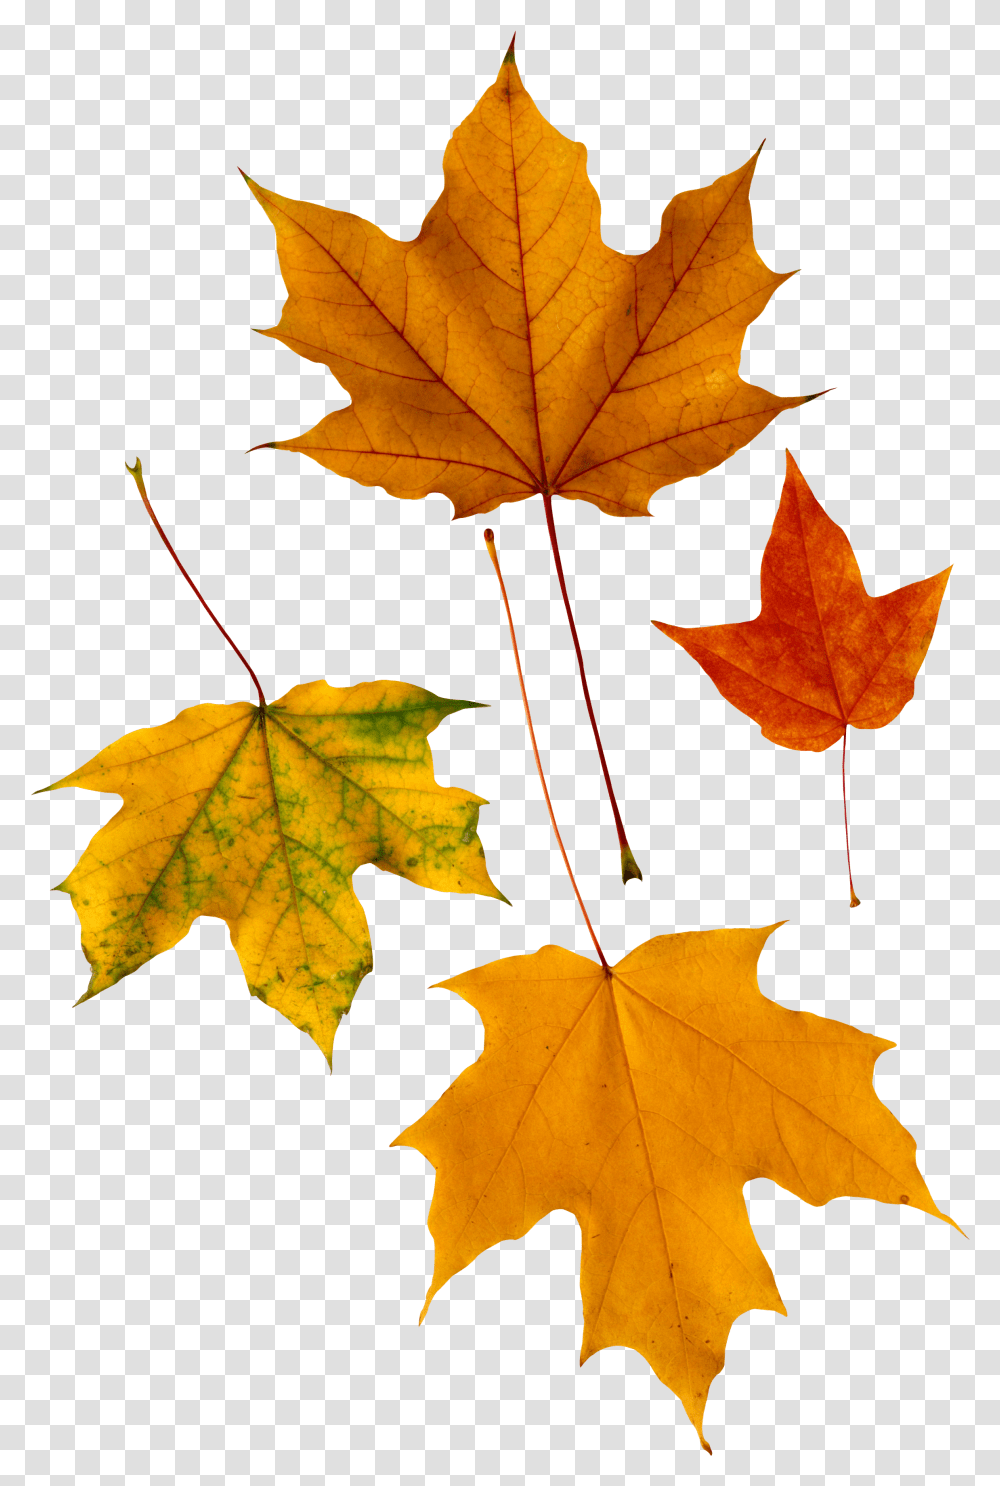 Autumn Leaves Icon Clipart Web Icons Psalm 136 1 Transparent Png